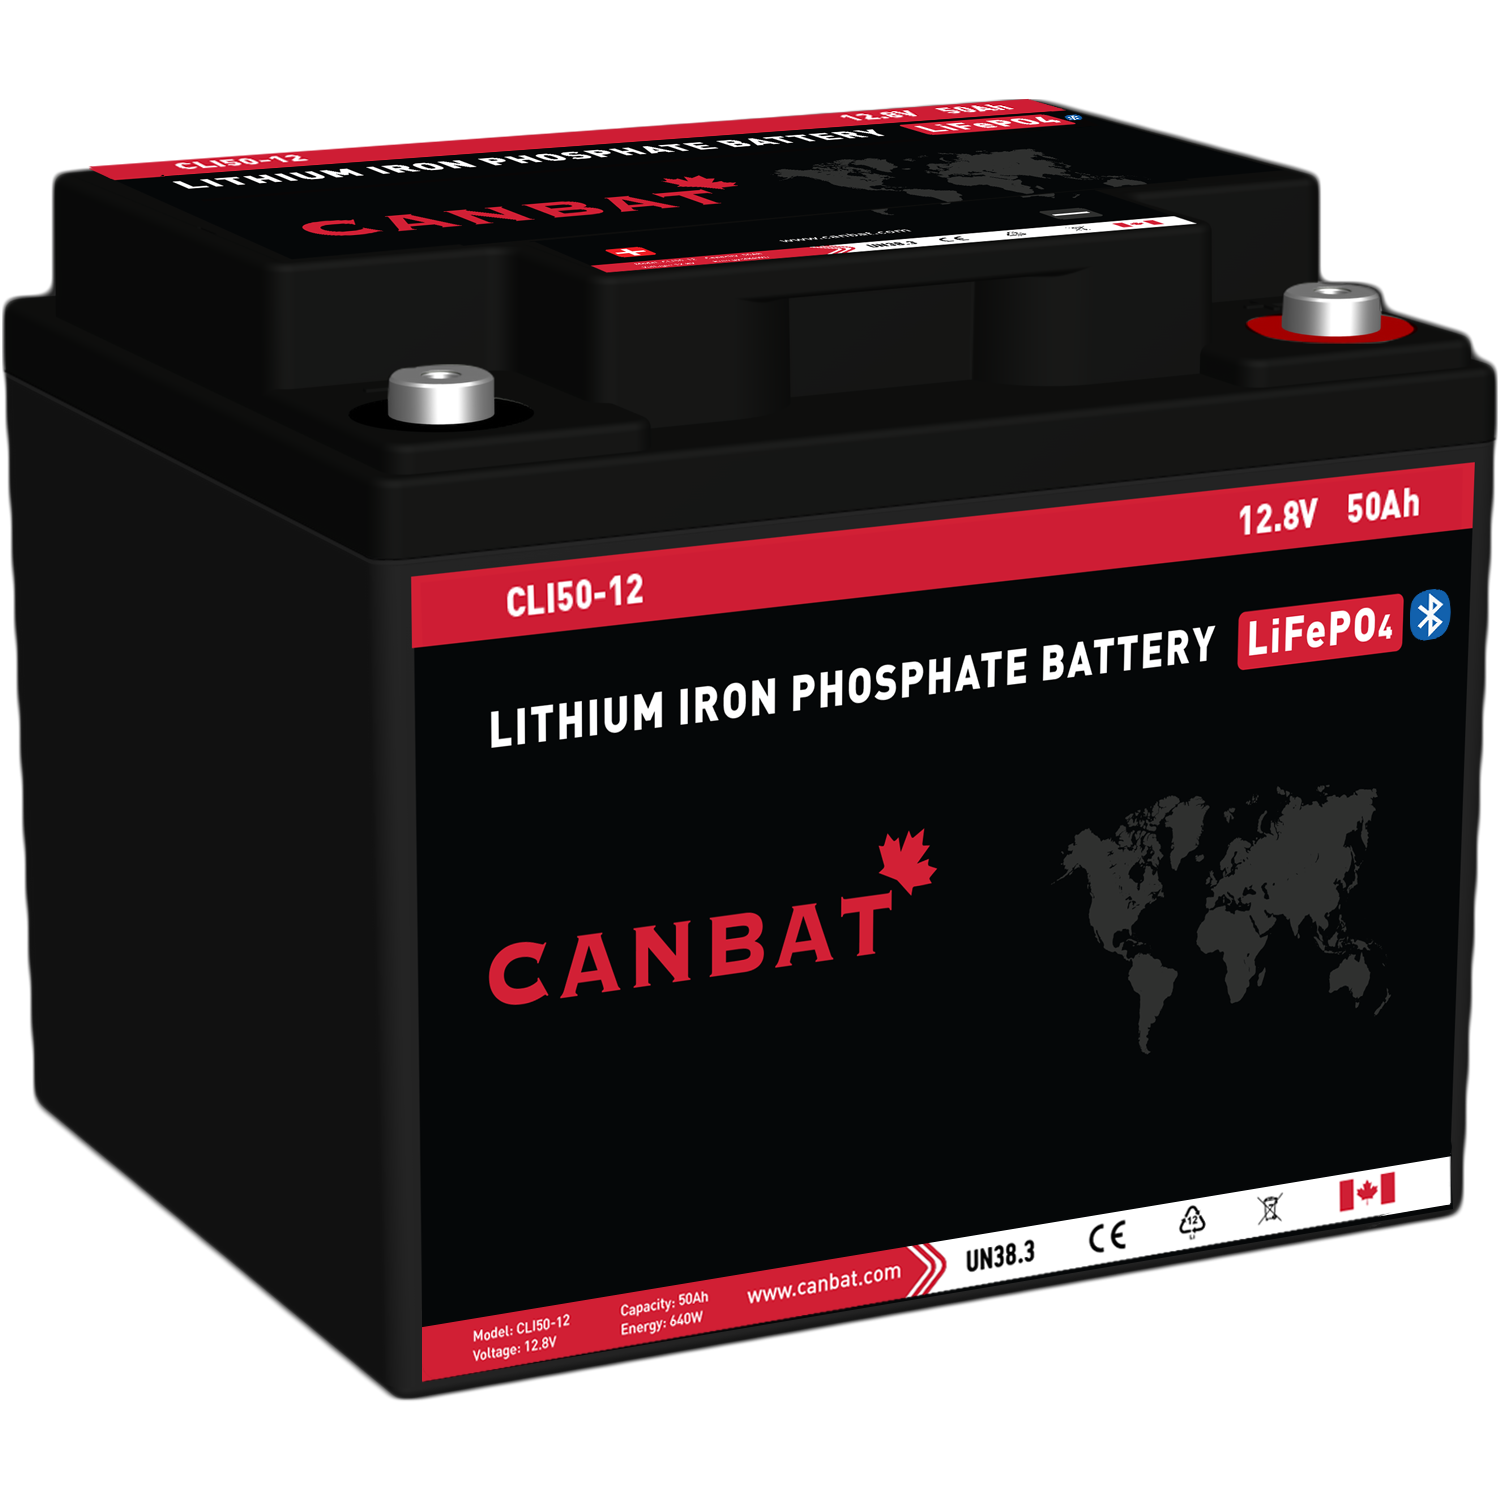 AIMS LITHIUM BATTERY 12V 50Ah LiFePO4 with BLUETOOTH MONITORING